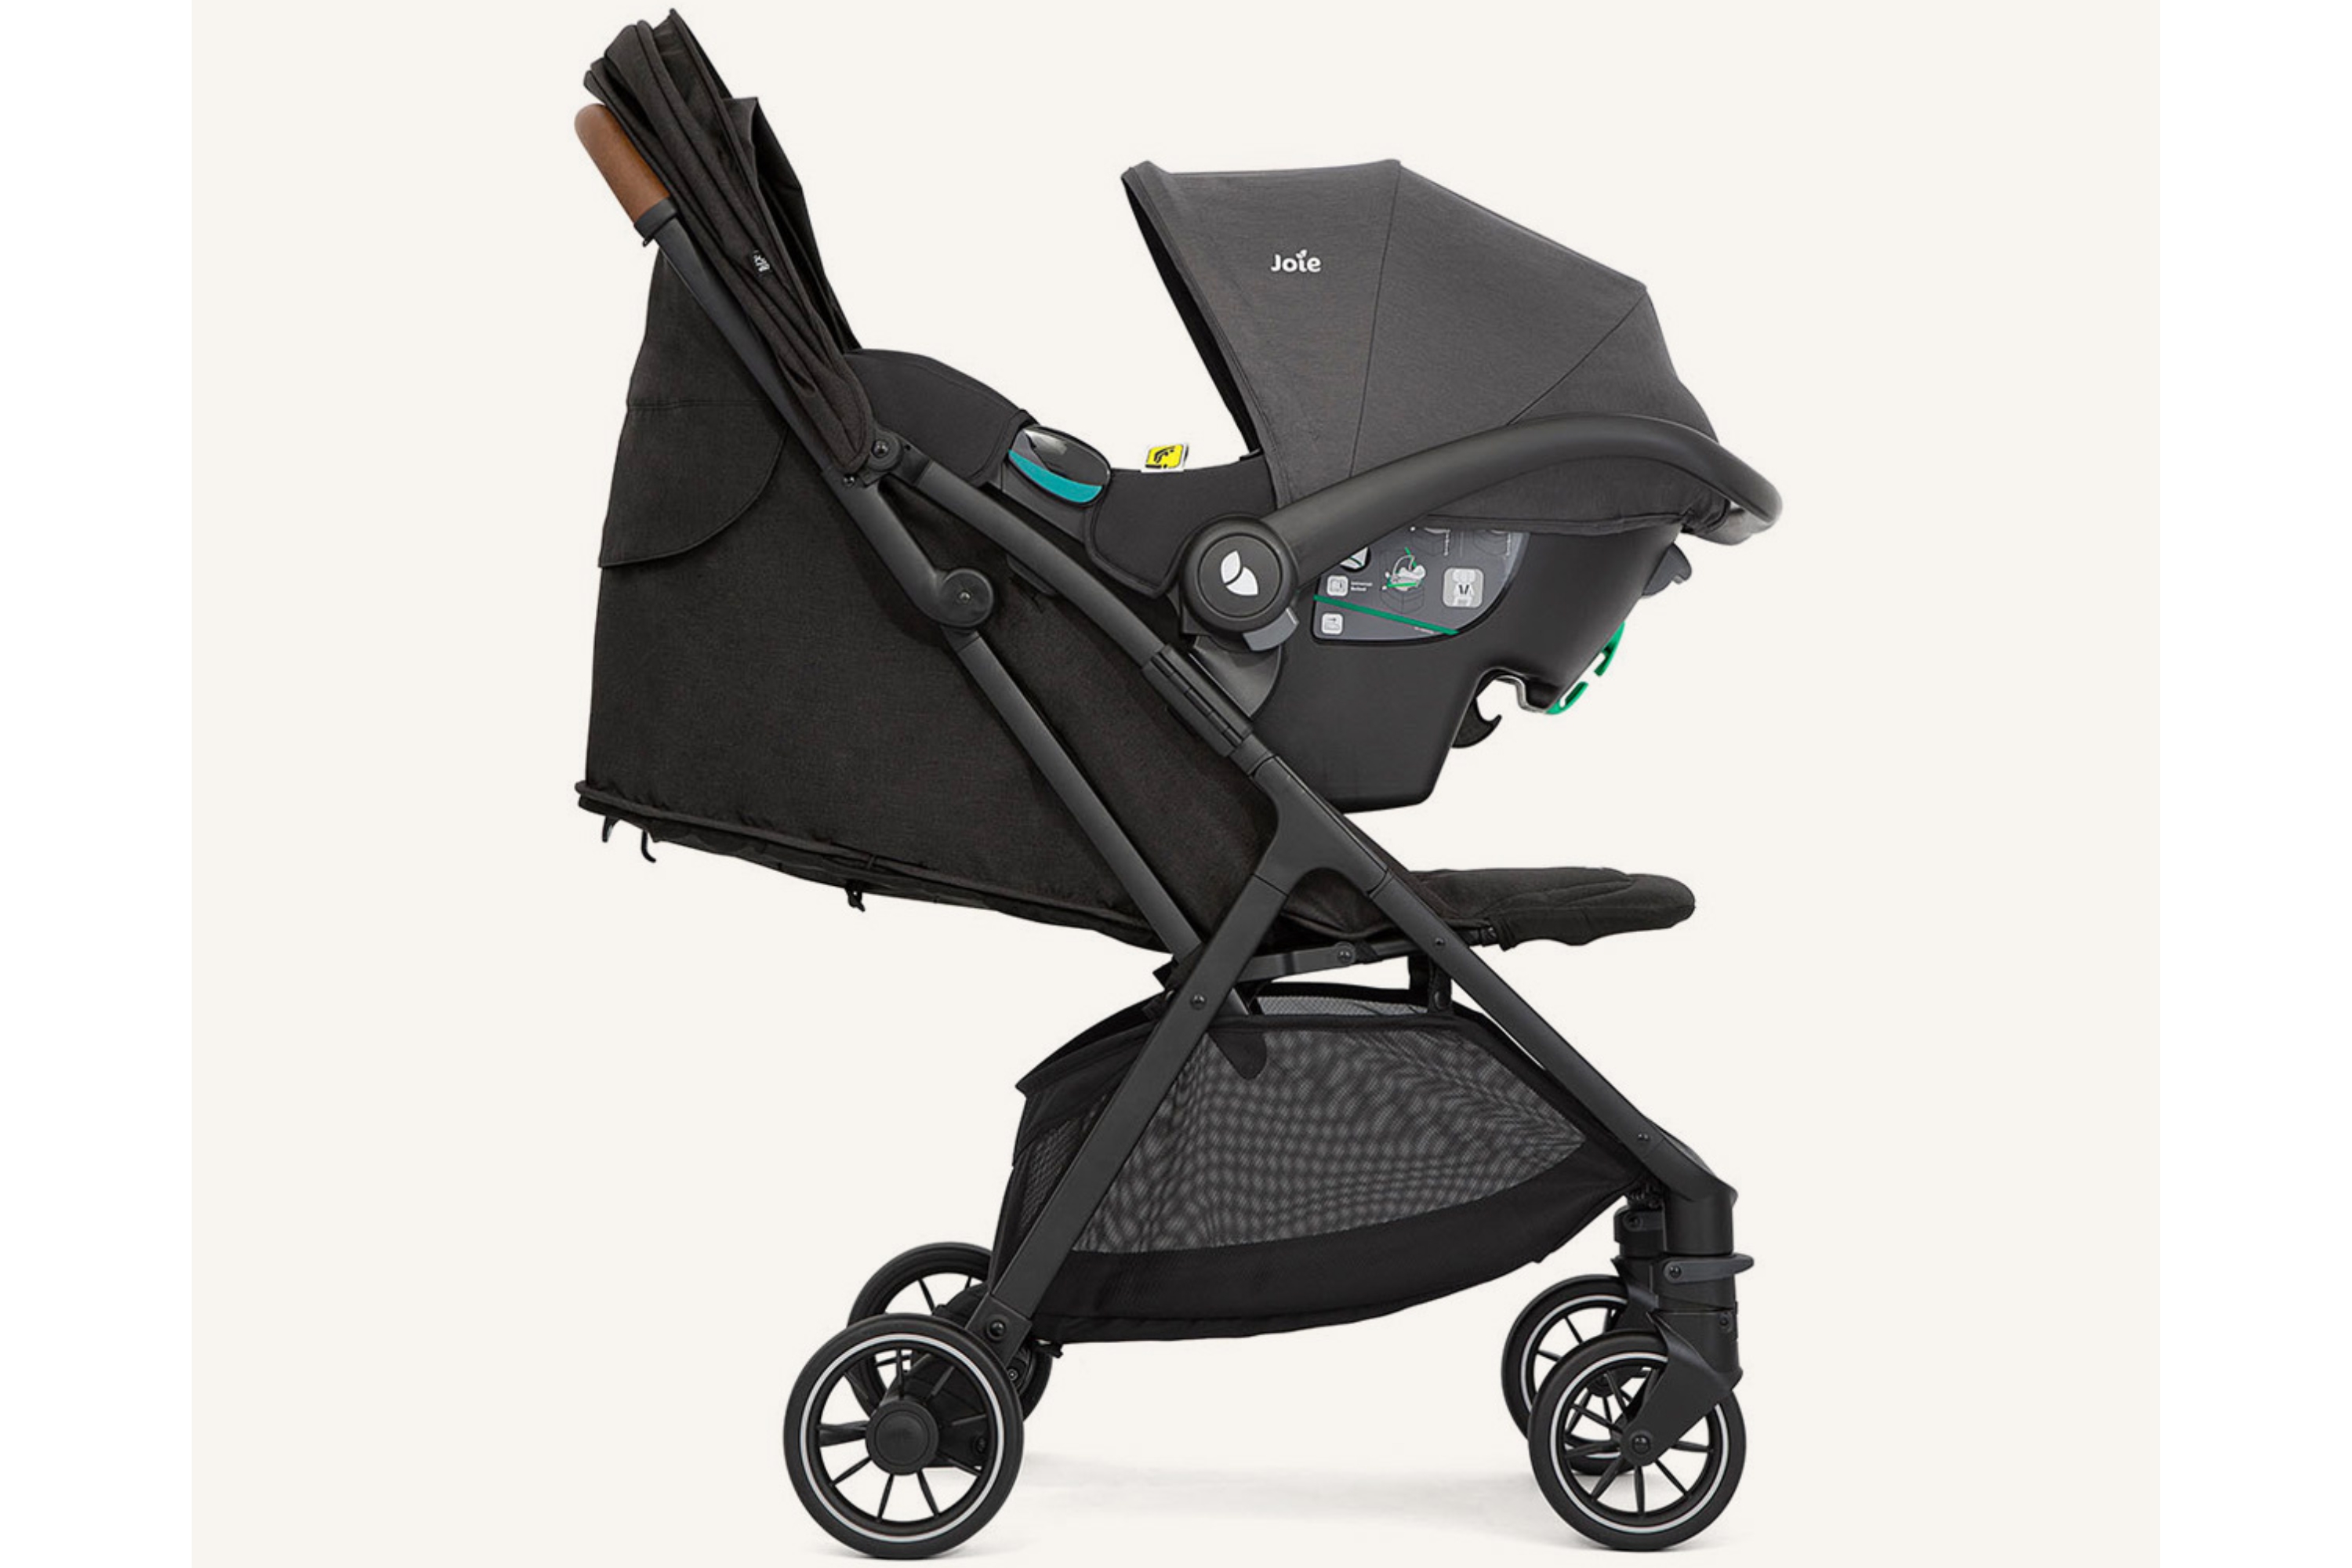 The Joie Pact Pro lightweight compact stroller with car seat attached